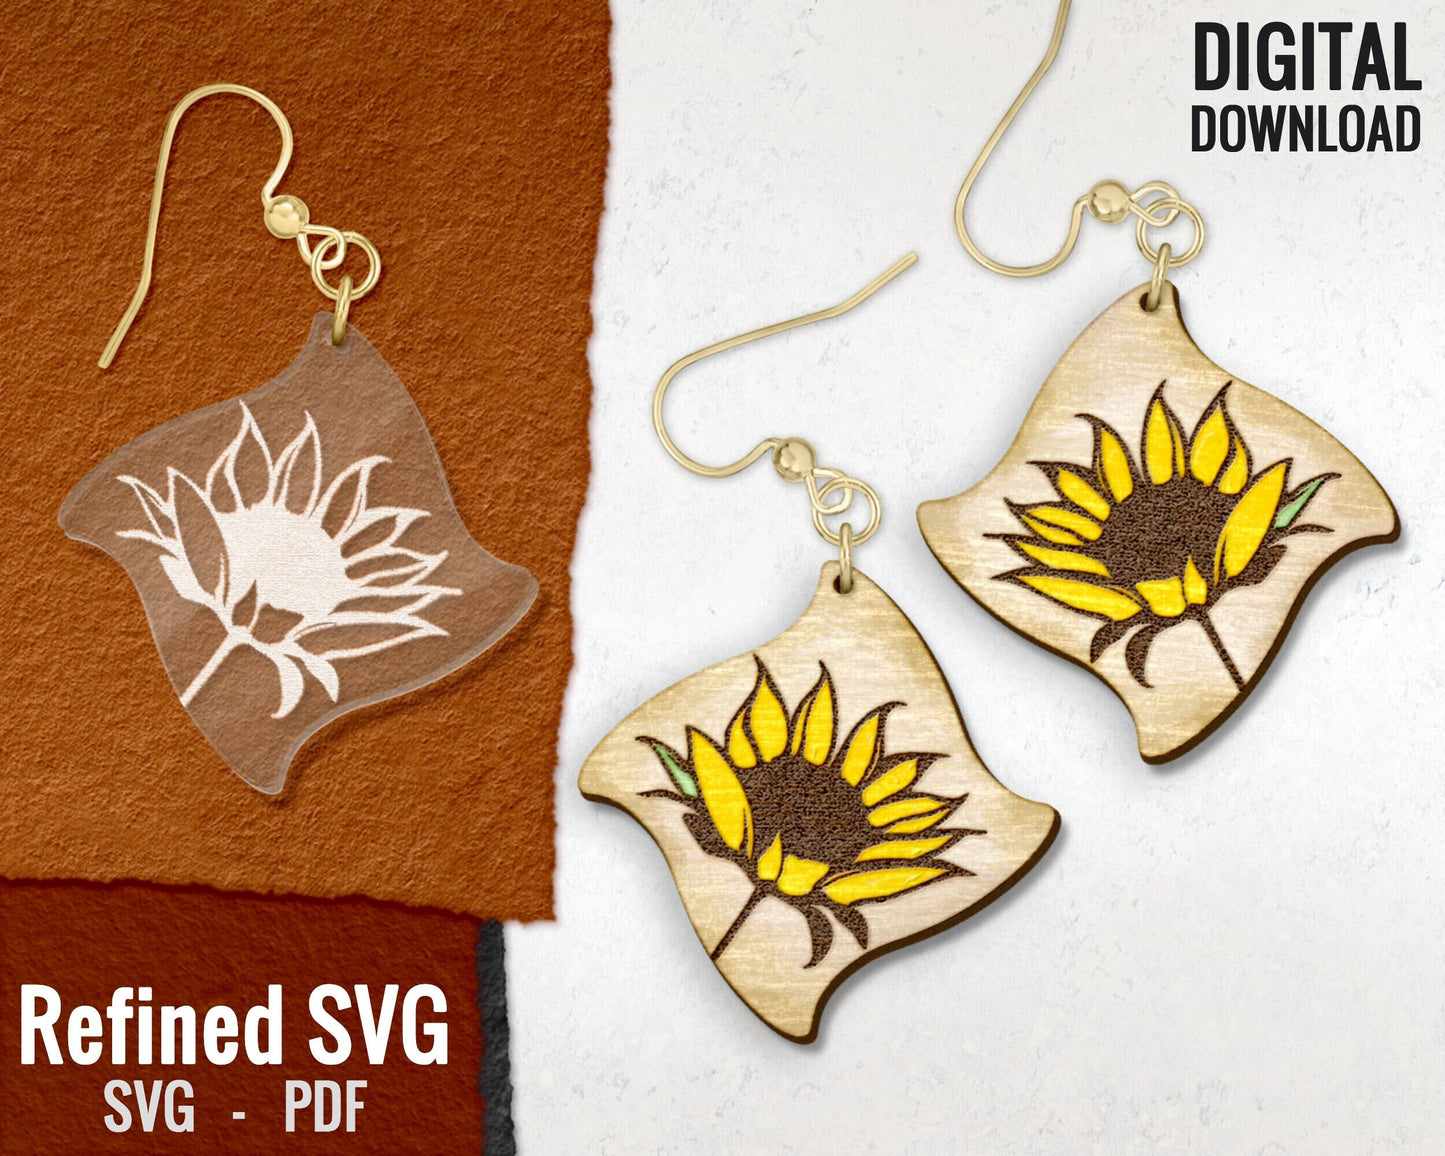 Sunflower Hair Clips + Matching Earring SVG File Set, Sunflower 2 Hair Clip Files + Earring SVG Files, Set of Claw Hair Clip Laser Design